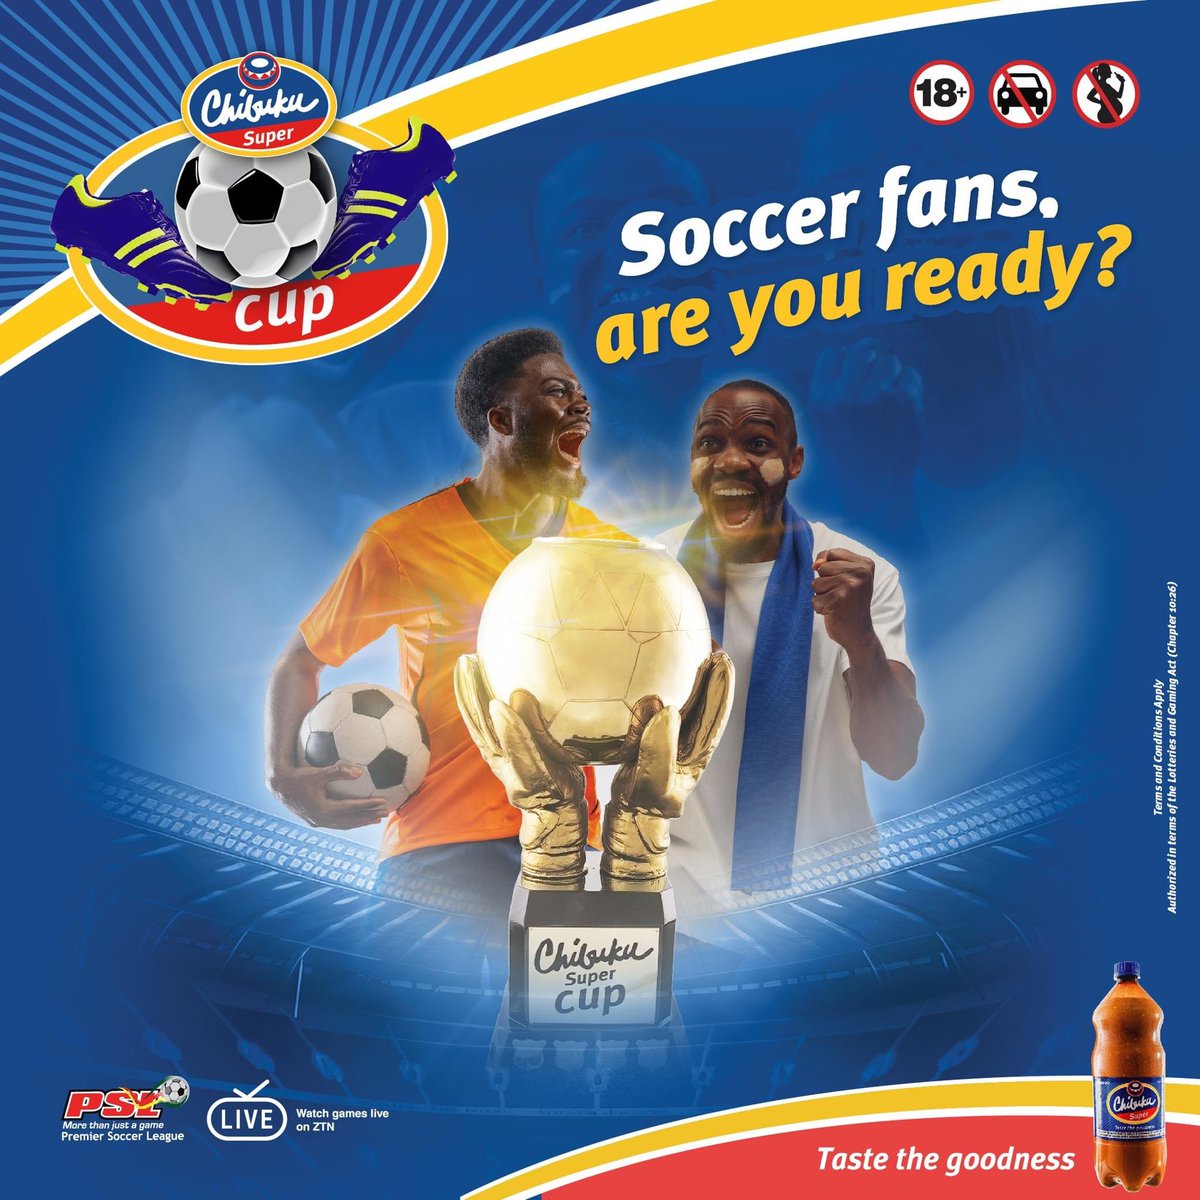 The 2023 #ChibukuSuperCup is upon us. Which team are you rooting for this year? Stay tuned for the draw this Wednesday